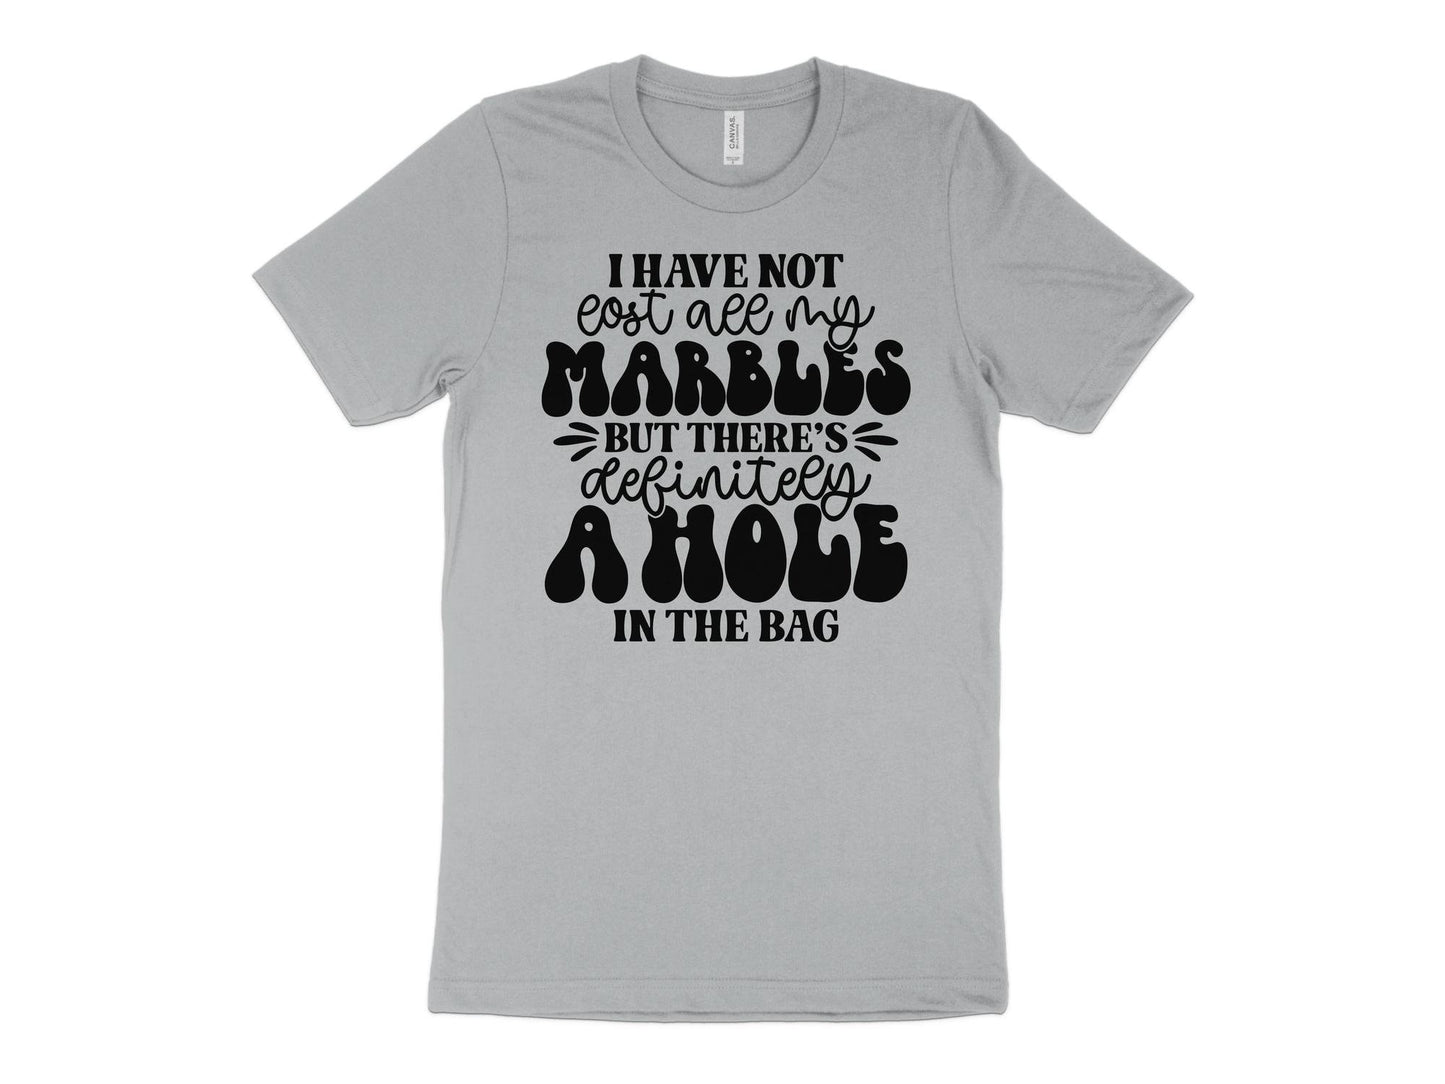 I Have Not Lost All My Marbles | Funny Shirt | Unisex Tee Shirt | Shirt For Her | Shirt For Him | Sarcastic Tee